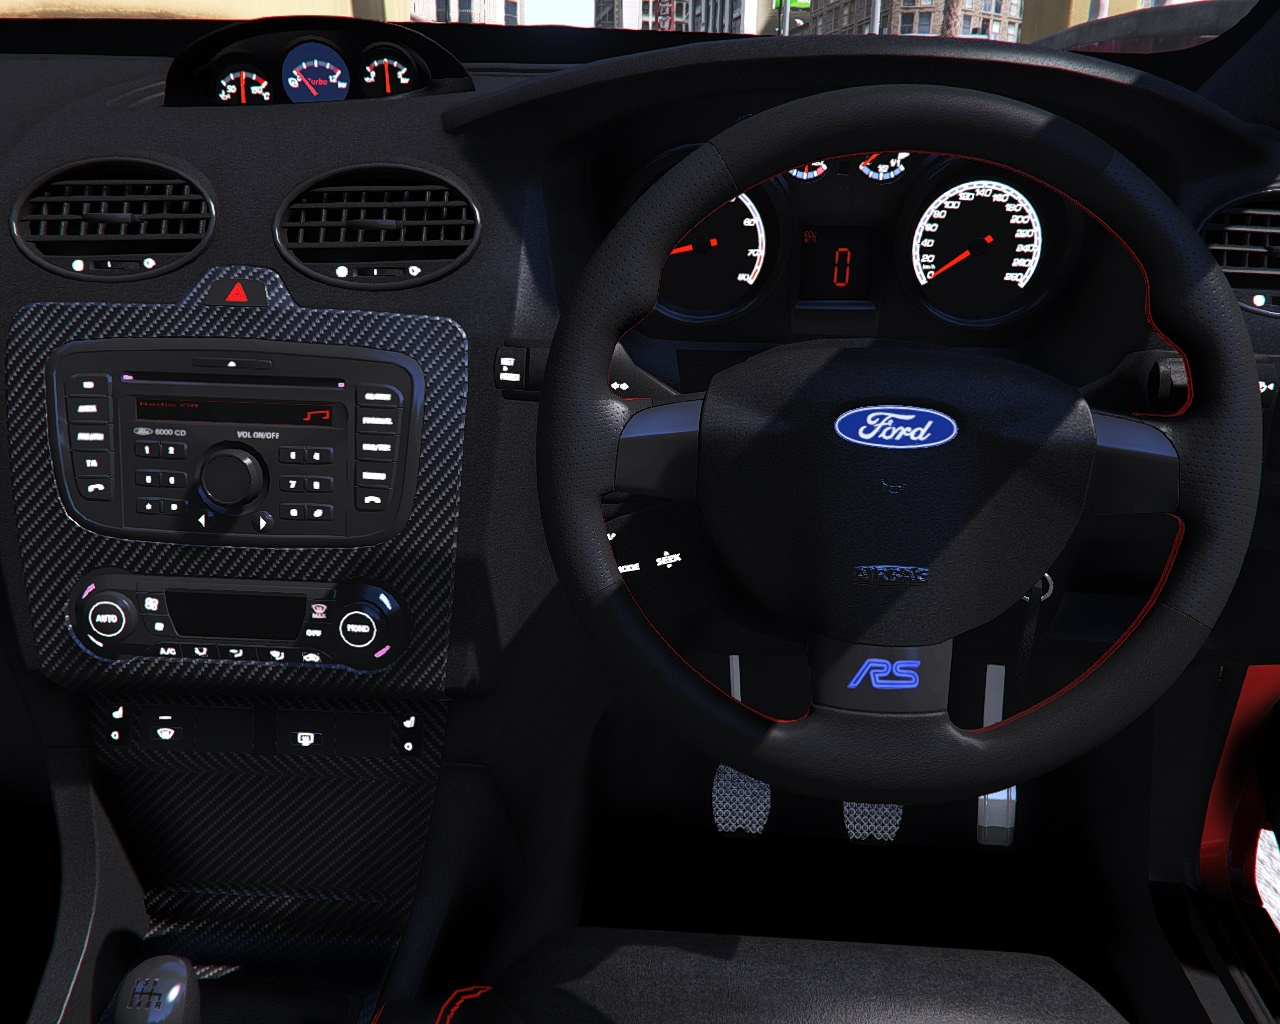 2009 Ford Focus RS Add-On RHD Template.